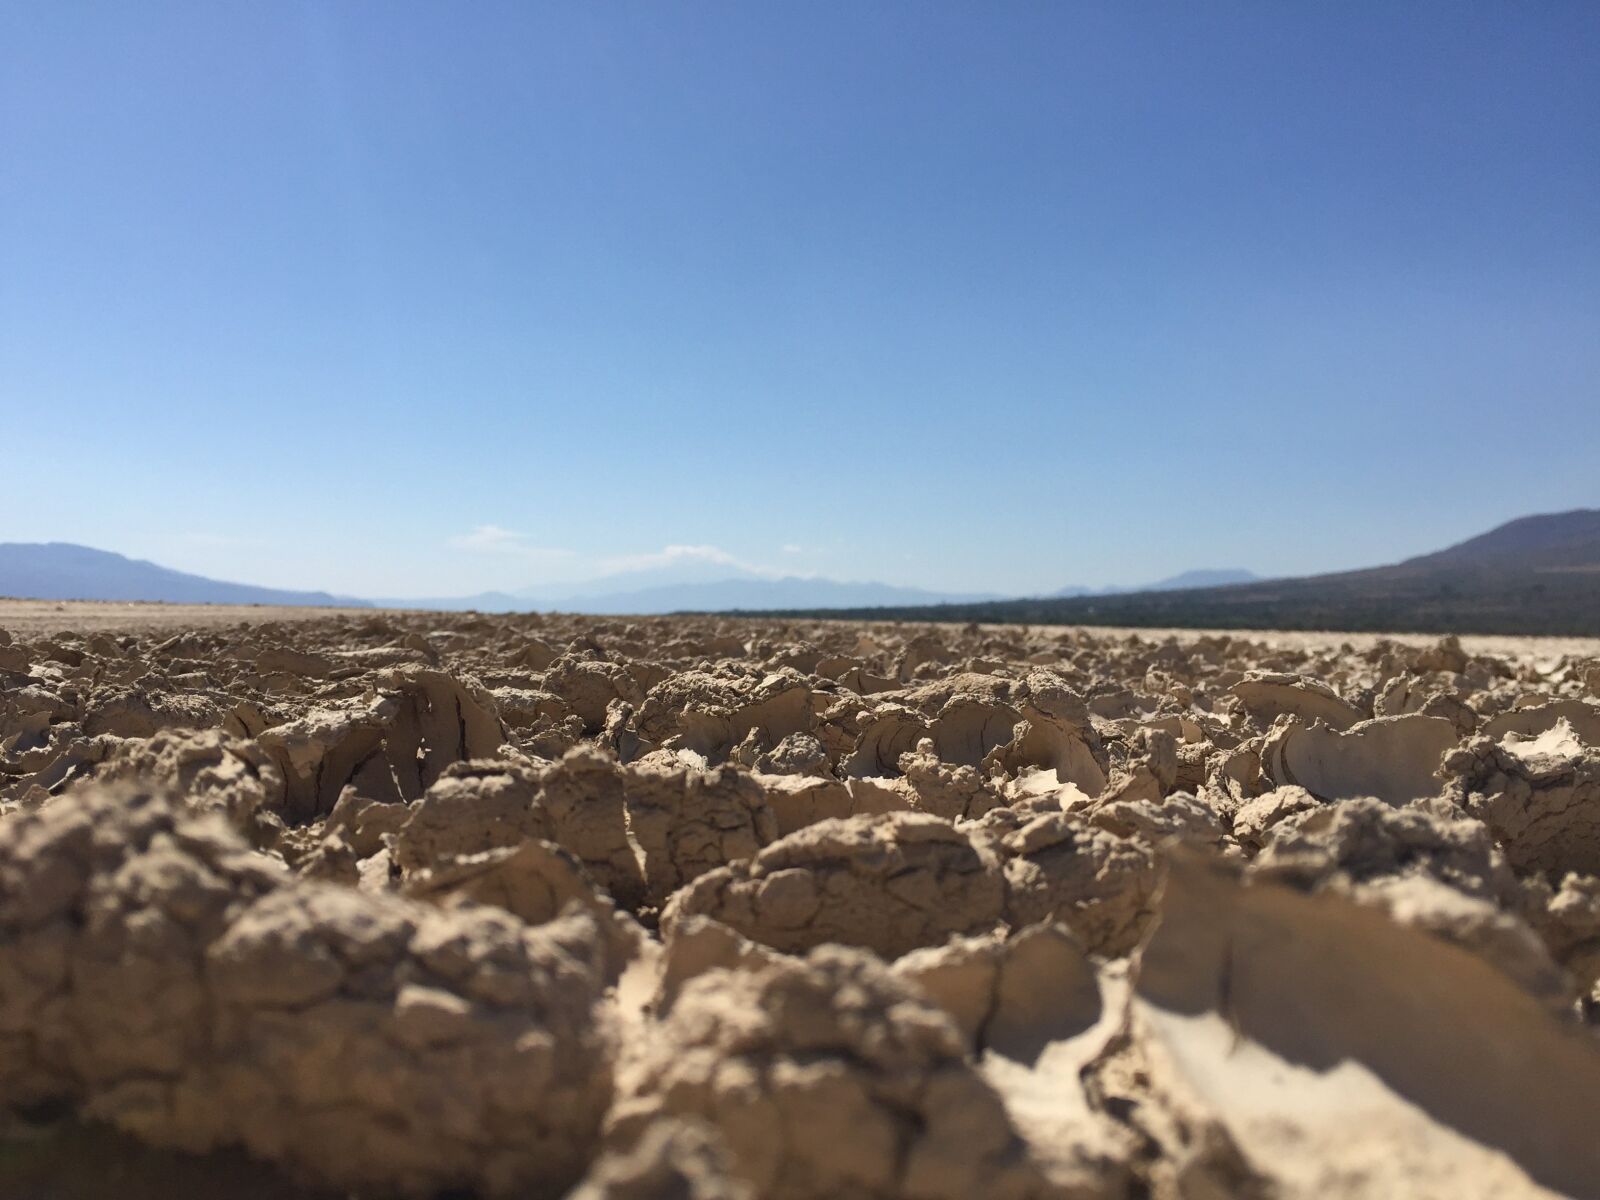 Apple iPhone 6 sample photo. Desert, drought, background photography